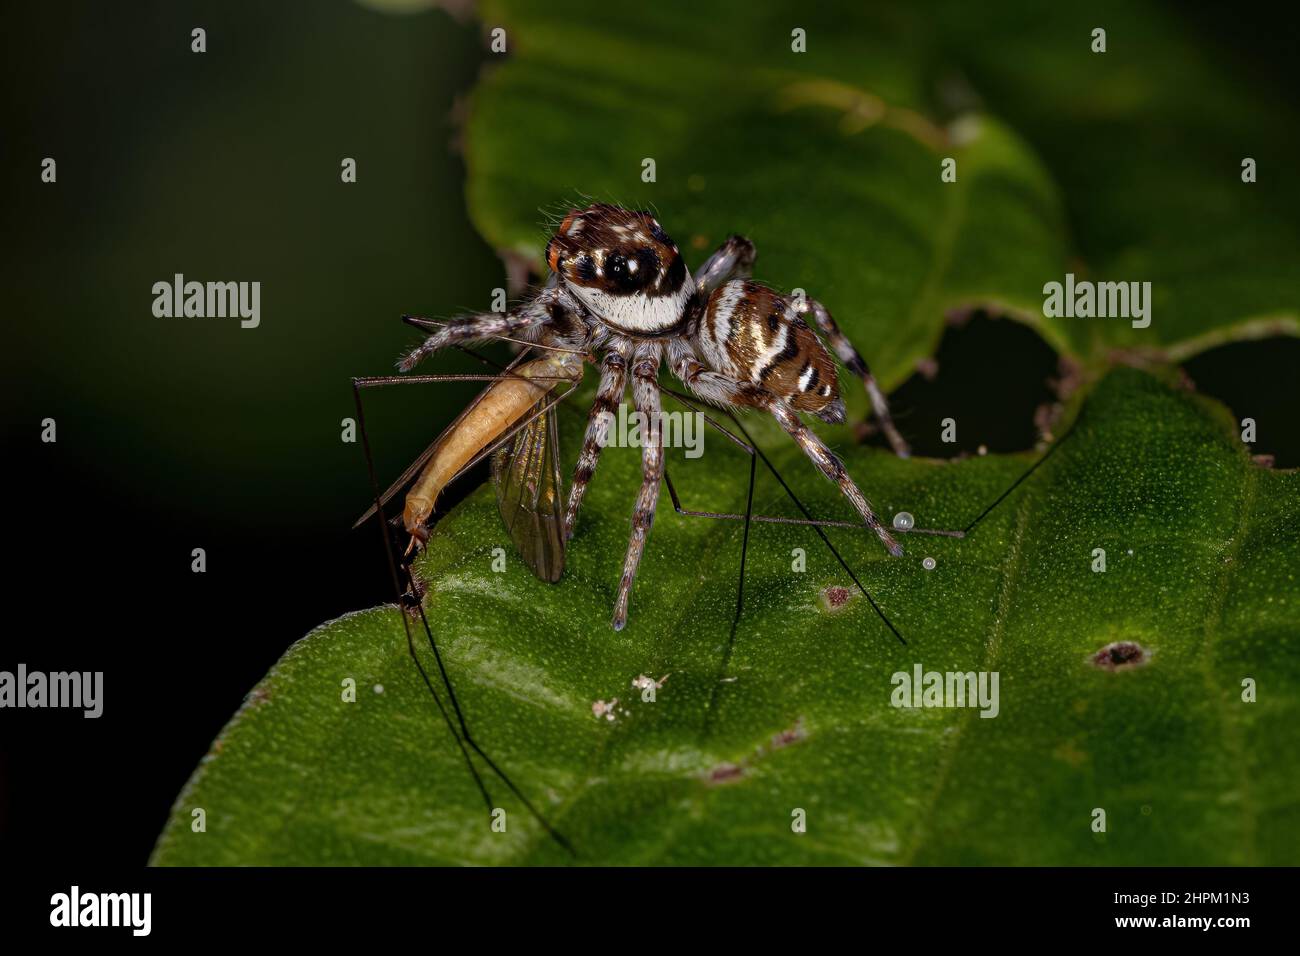 Small Jumping Spider of the species Philira micans preying on a fly Stock Photo